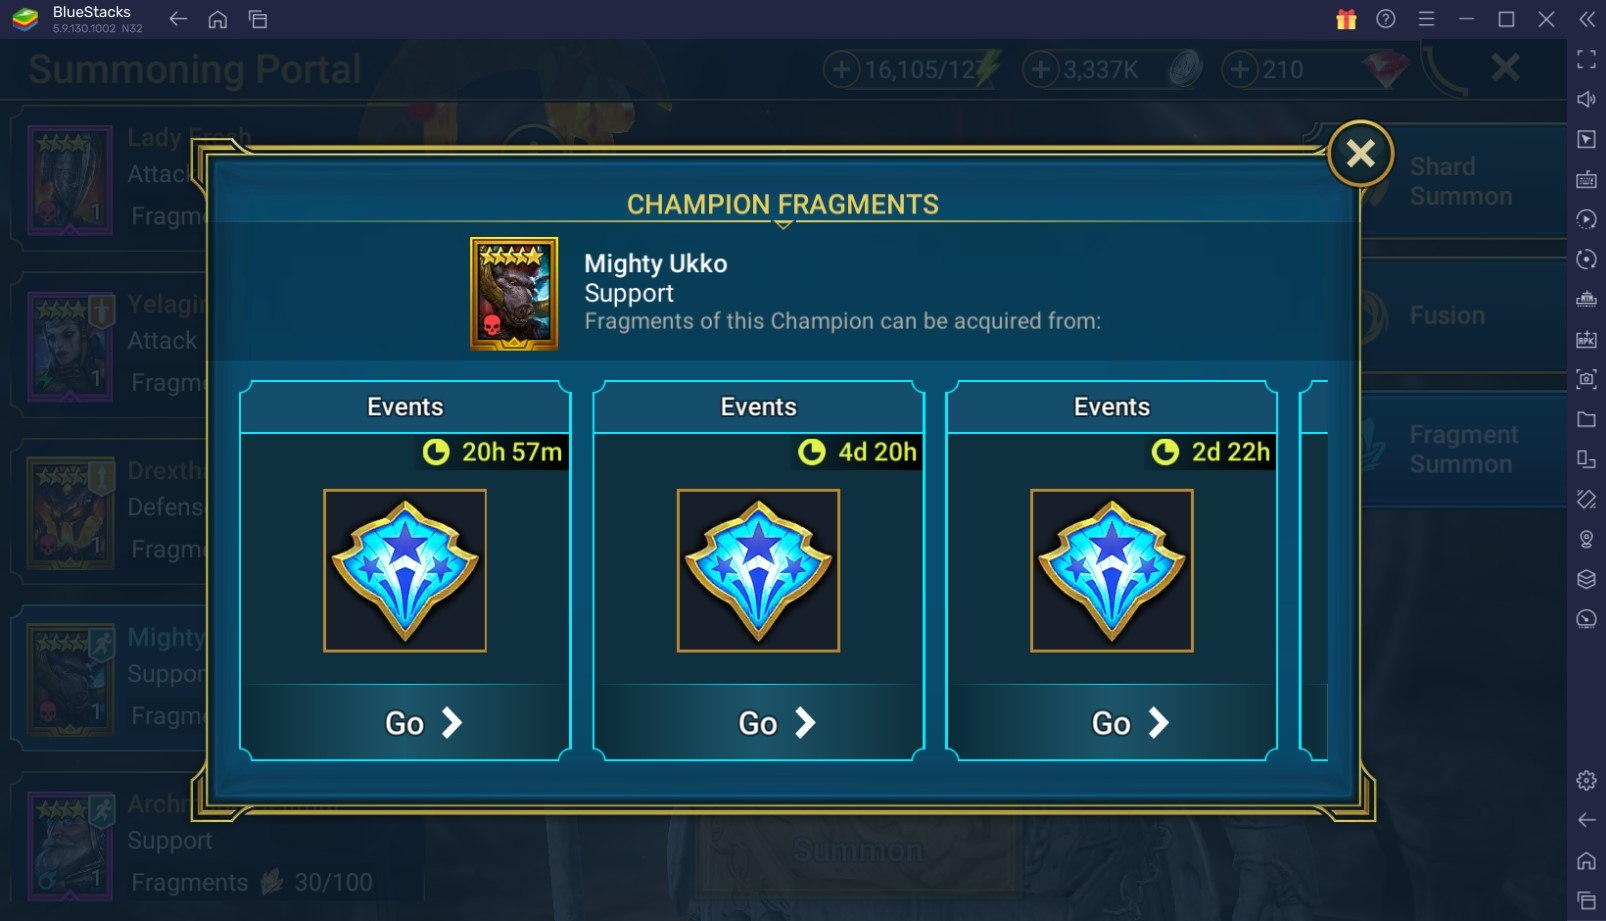 RAID: Shadow Legends – Mighty Ukko Fragment Fusion Event Guide